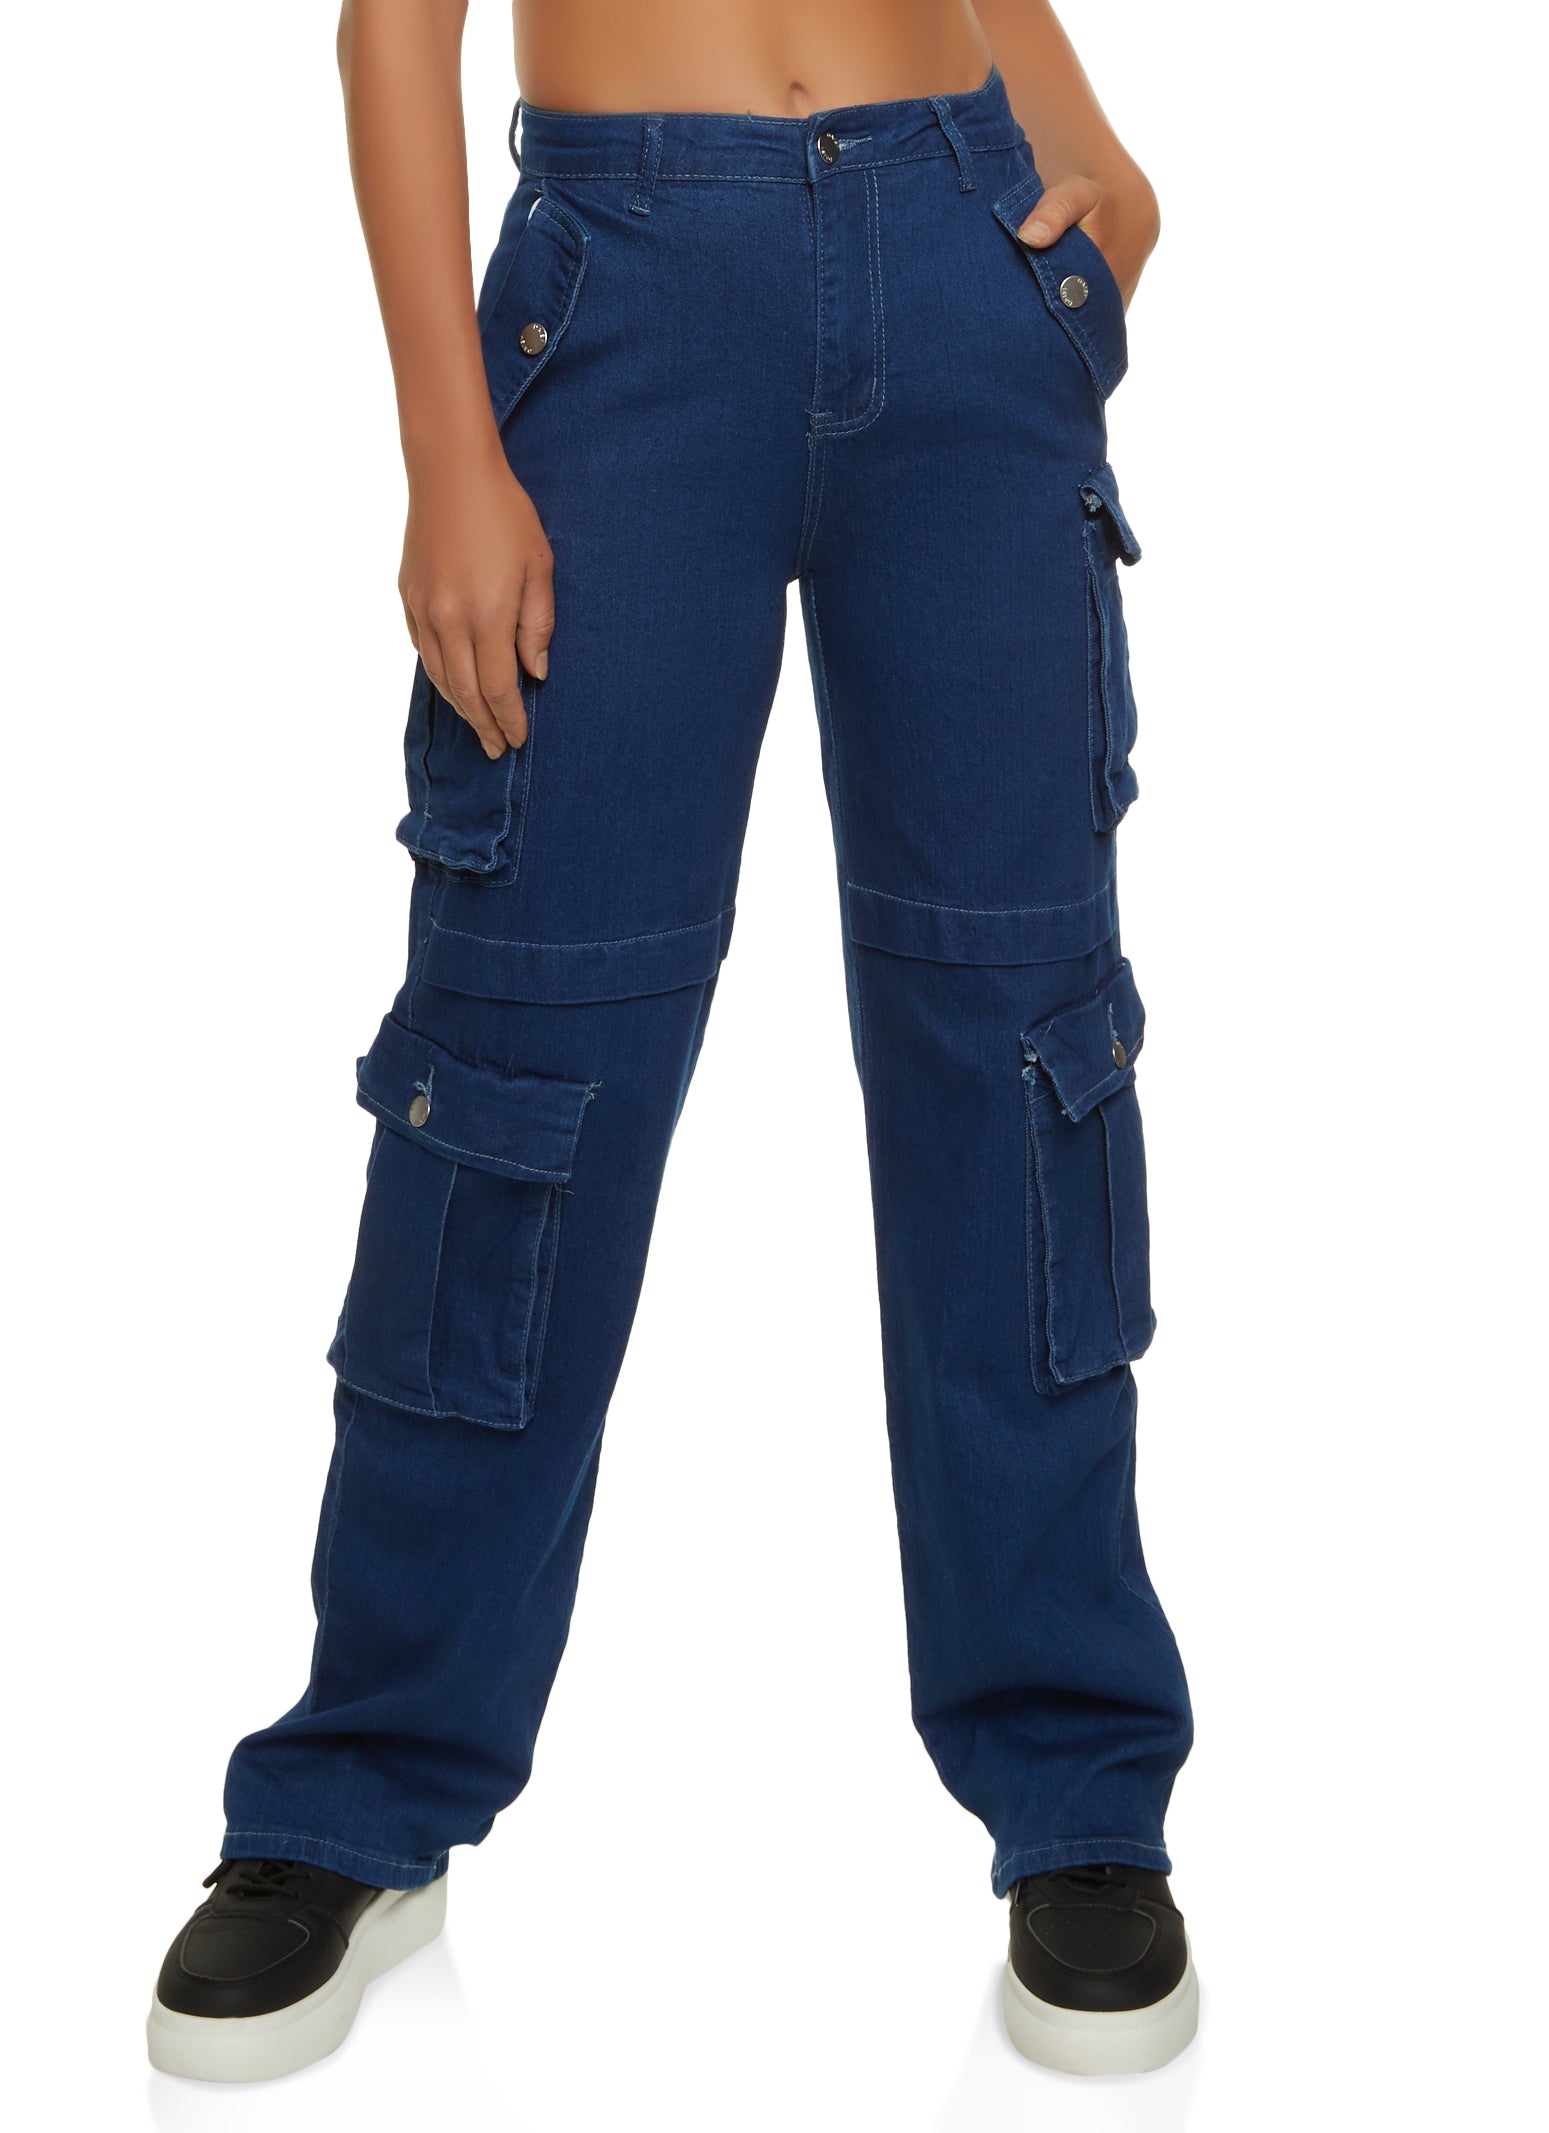 Cheap Solid Cargo Jeans Denim Pant with Side Pocket Women trousers